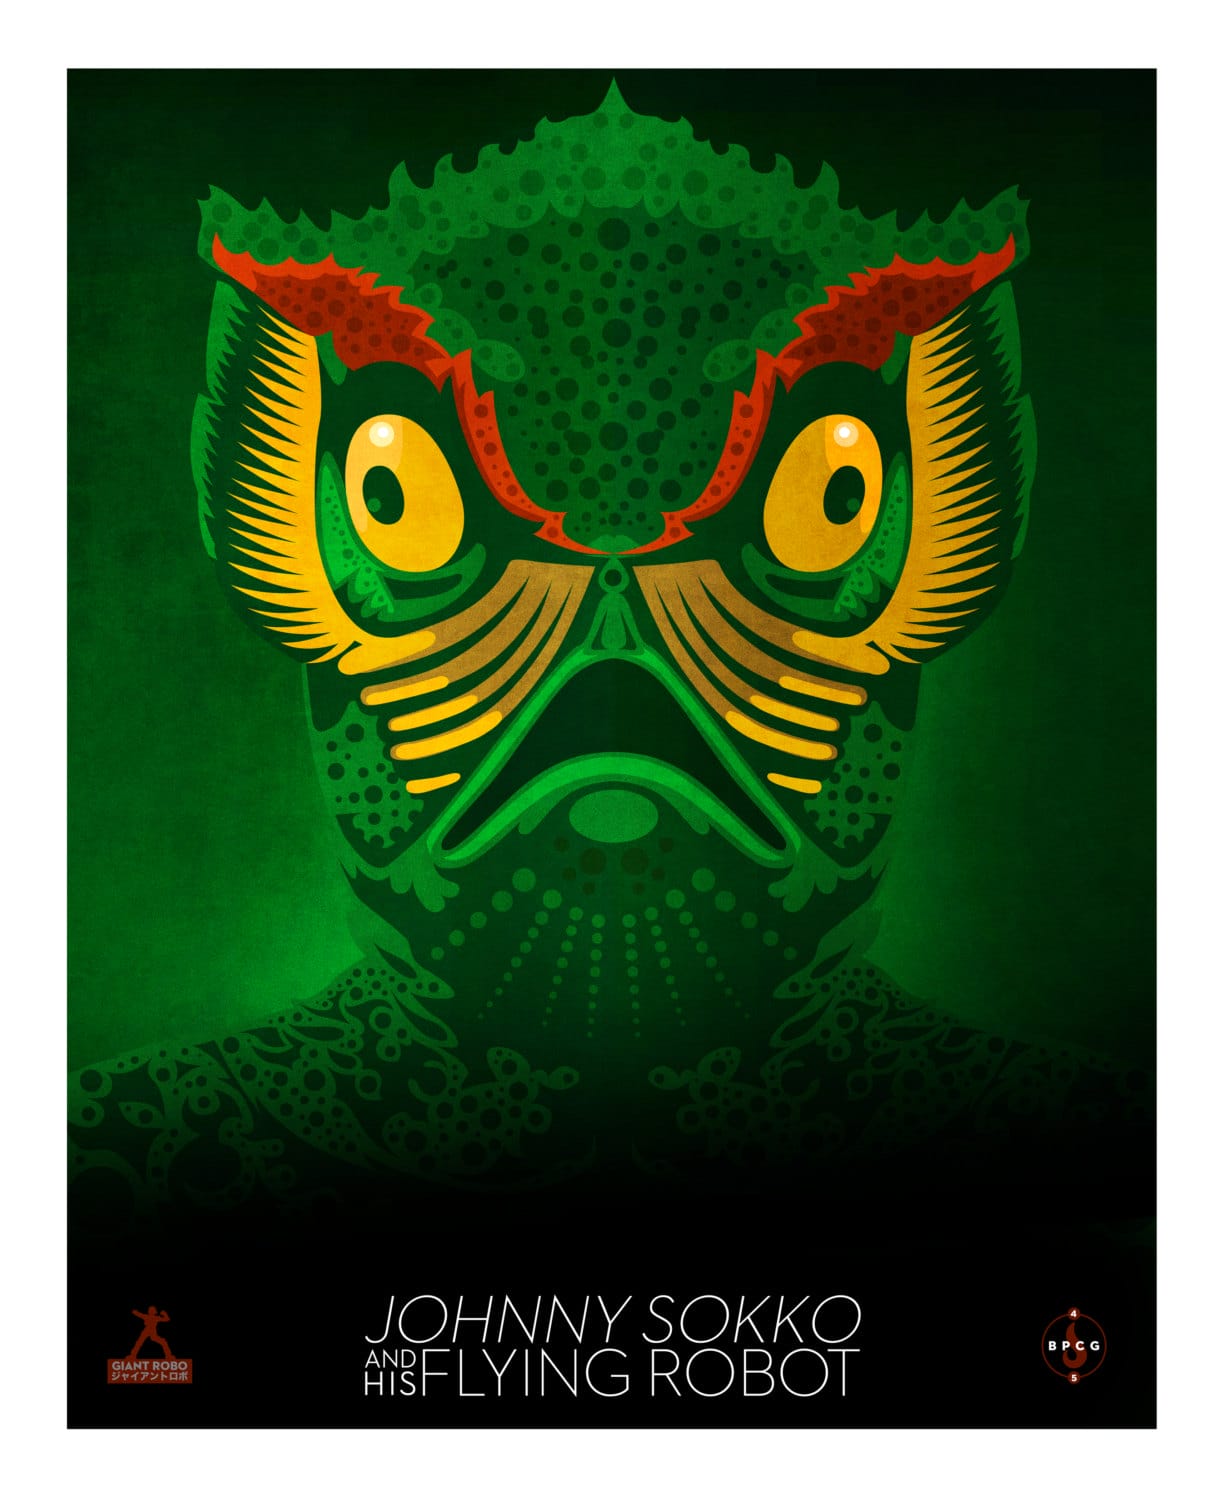 johnny-soklo-and-his-flying-robot-4